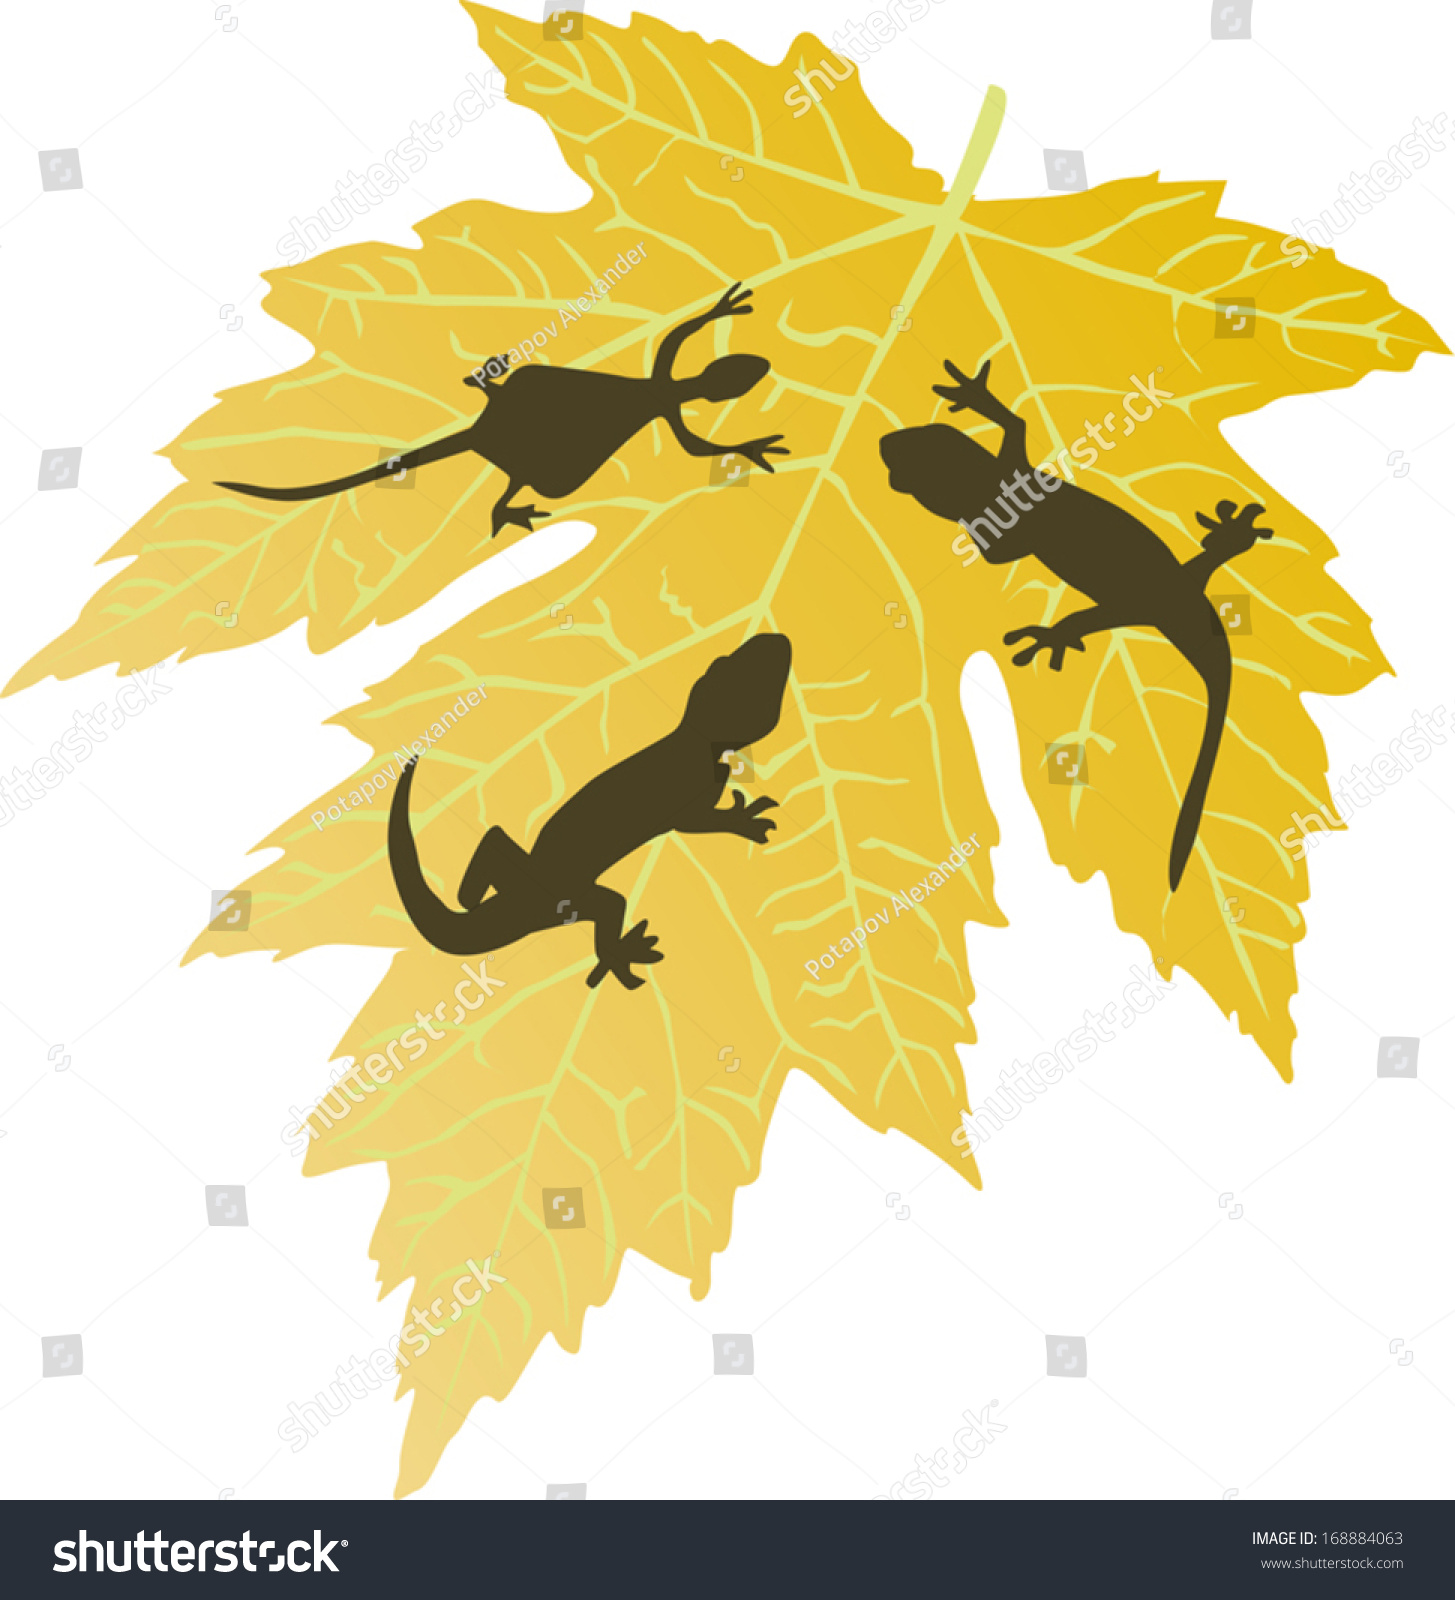 Illustration Yellow Leaf Lizard Silhouettes Stock Vector 168884063 ...